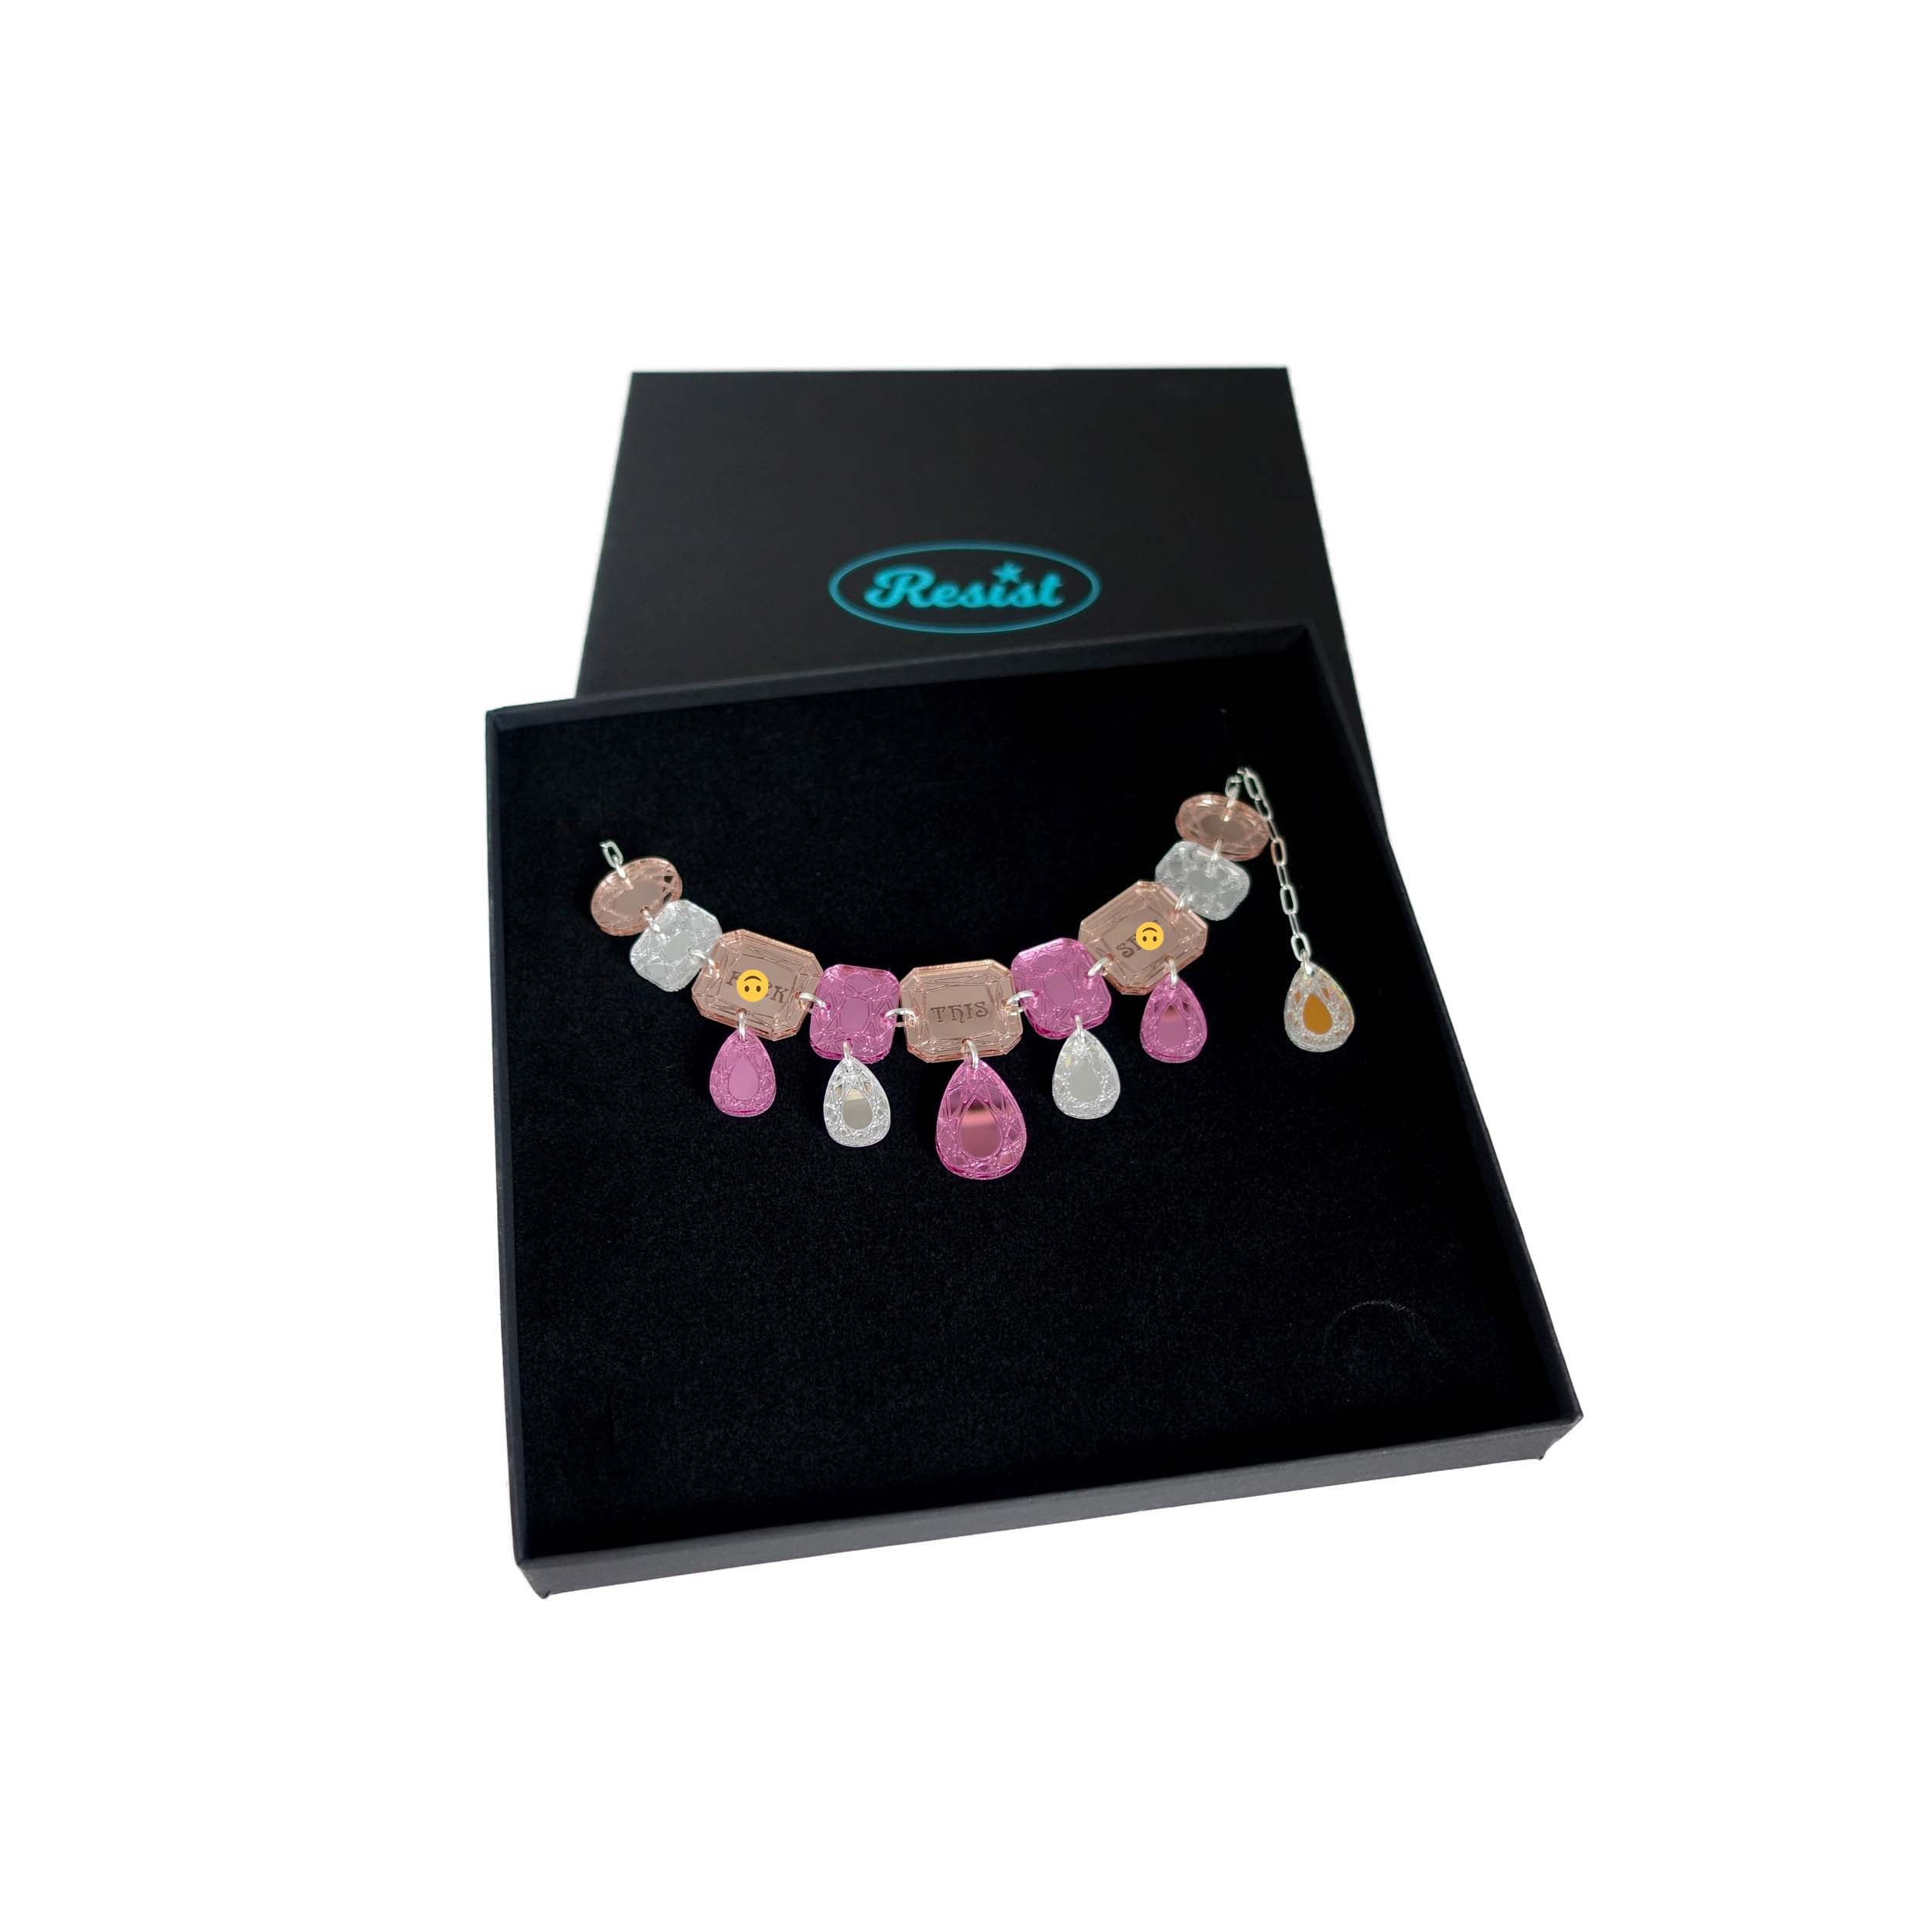 A pink, rose gold and silver F*ck this Sh*t jewel necklace shown in a Wear and Resist gift box. Sweary jewels!  